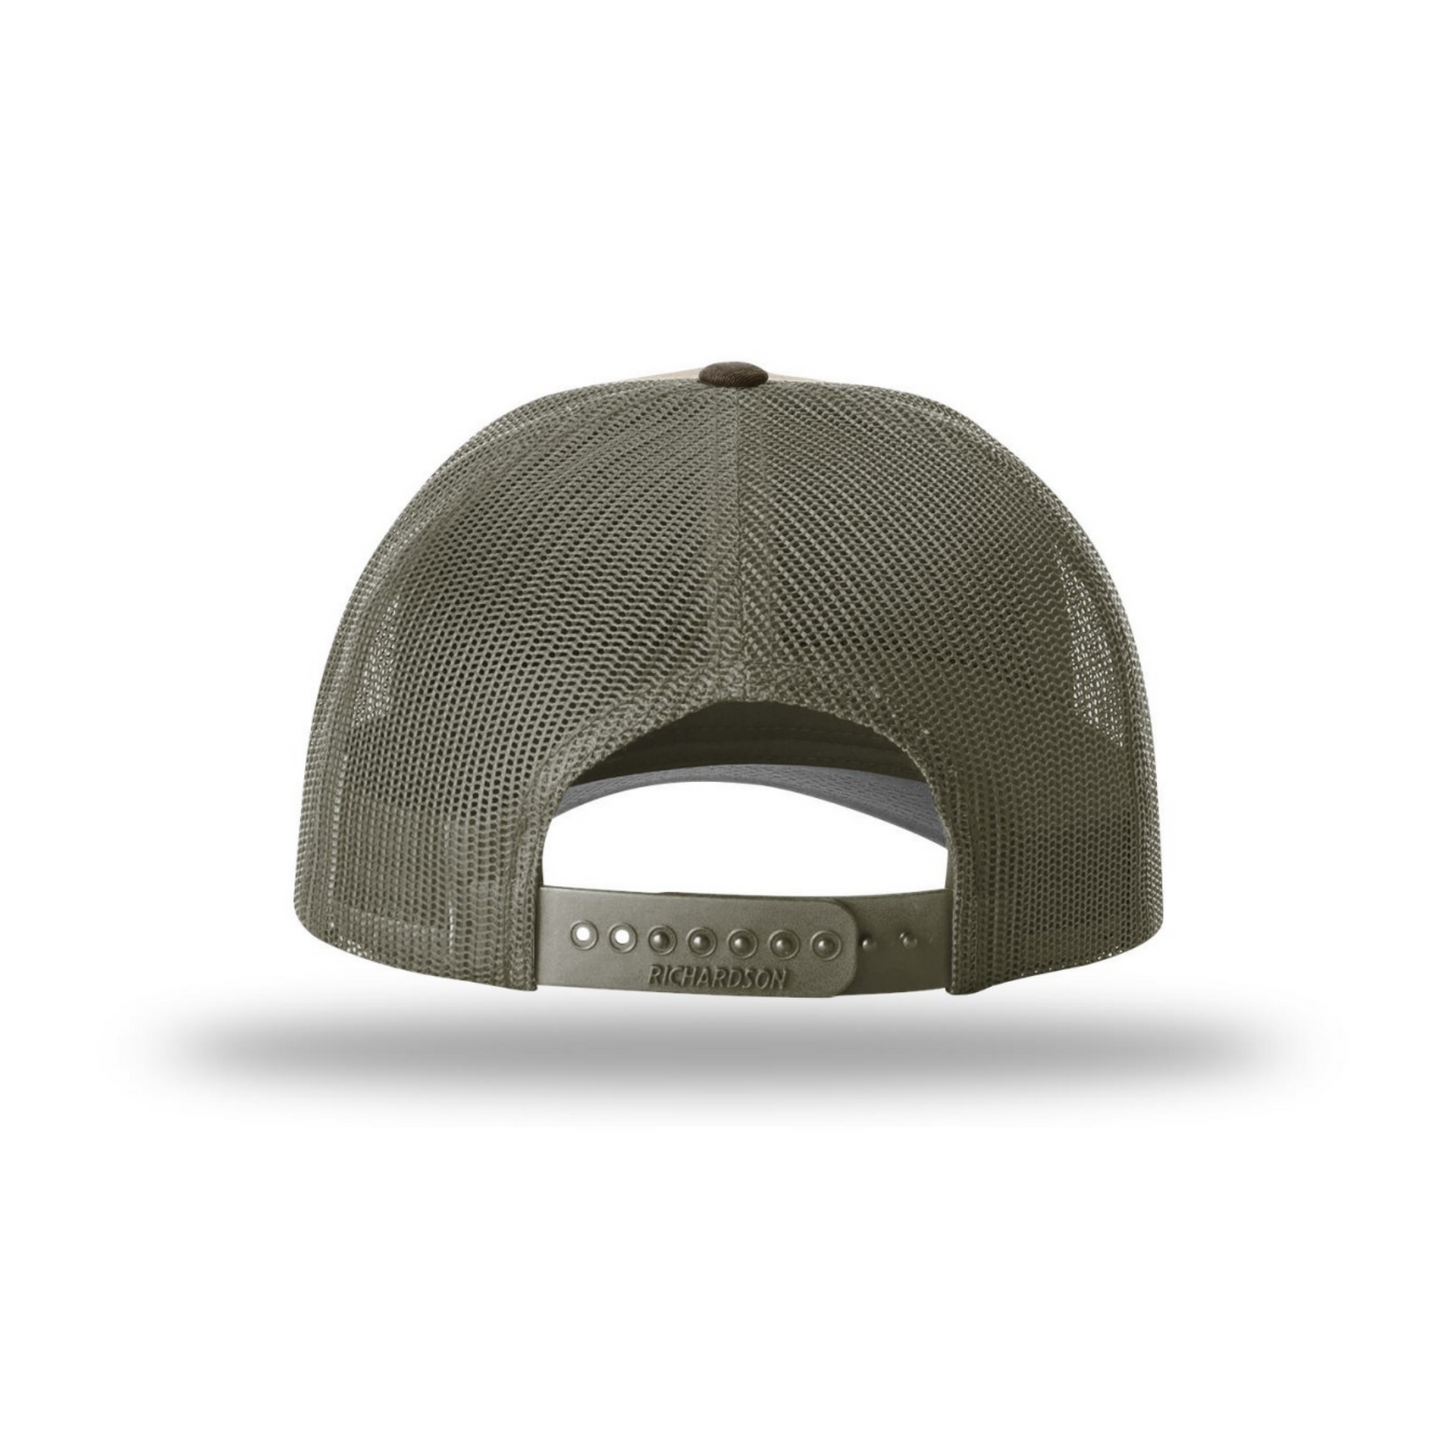 Richardson Low Pro Trucker Cap with Leather Patch